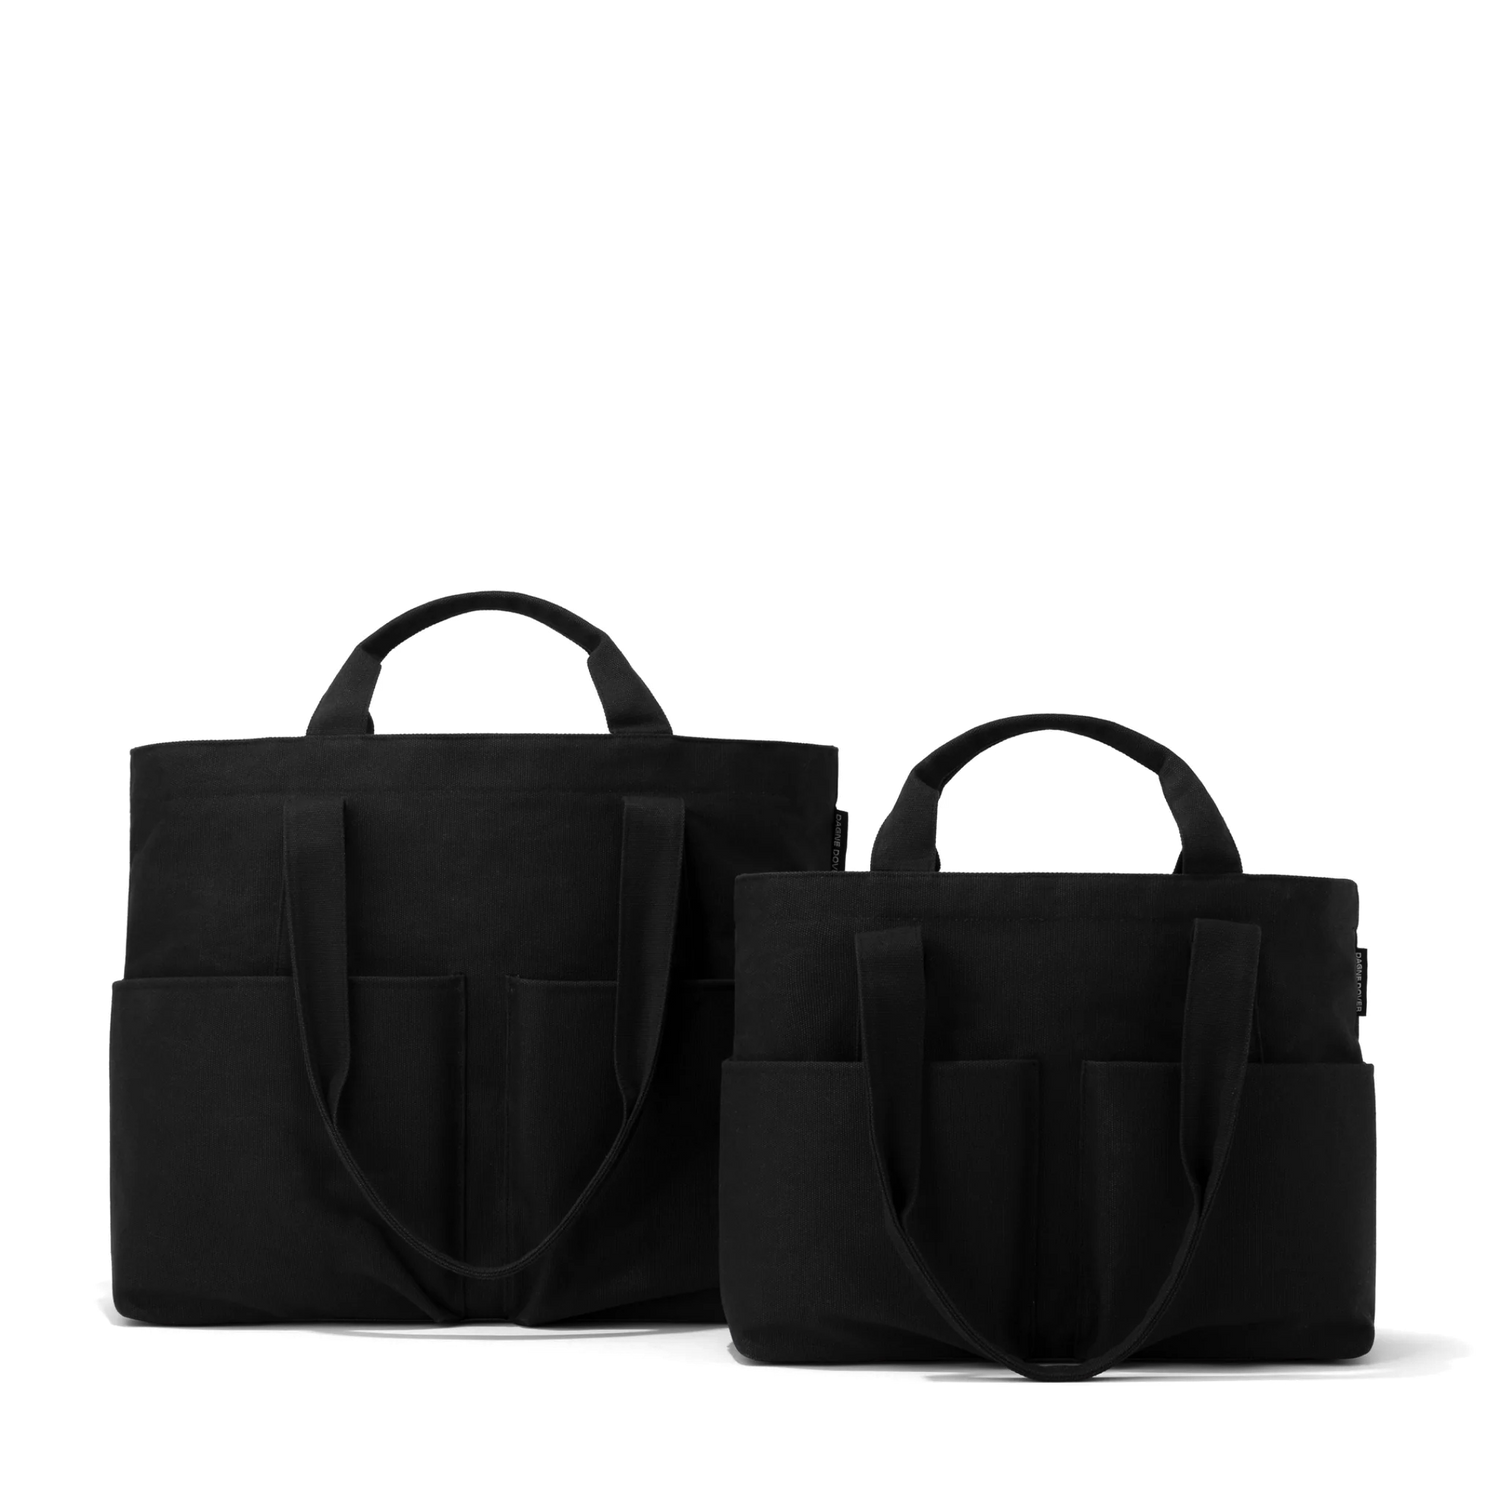 Dagne Dover - Introducing the Vida Tote. Two sizes. Endless uses